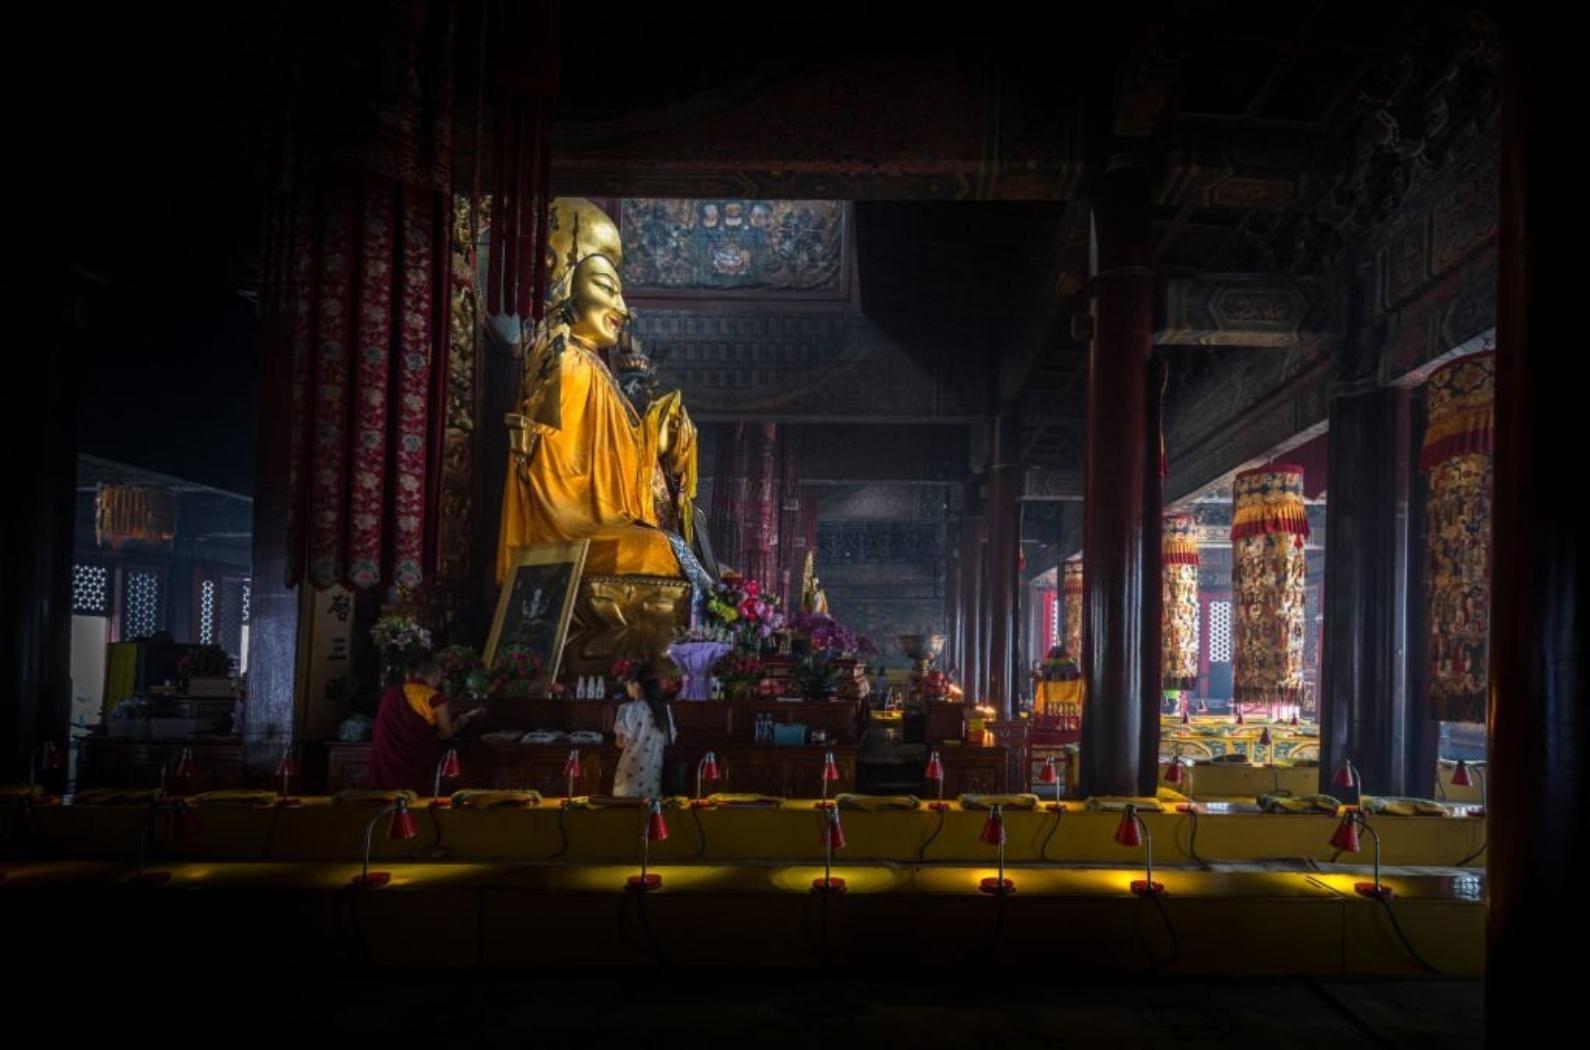 The image shows the inside of the famous Lama temple in Beijing with a huge golden buddha.